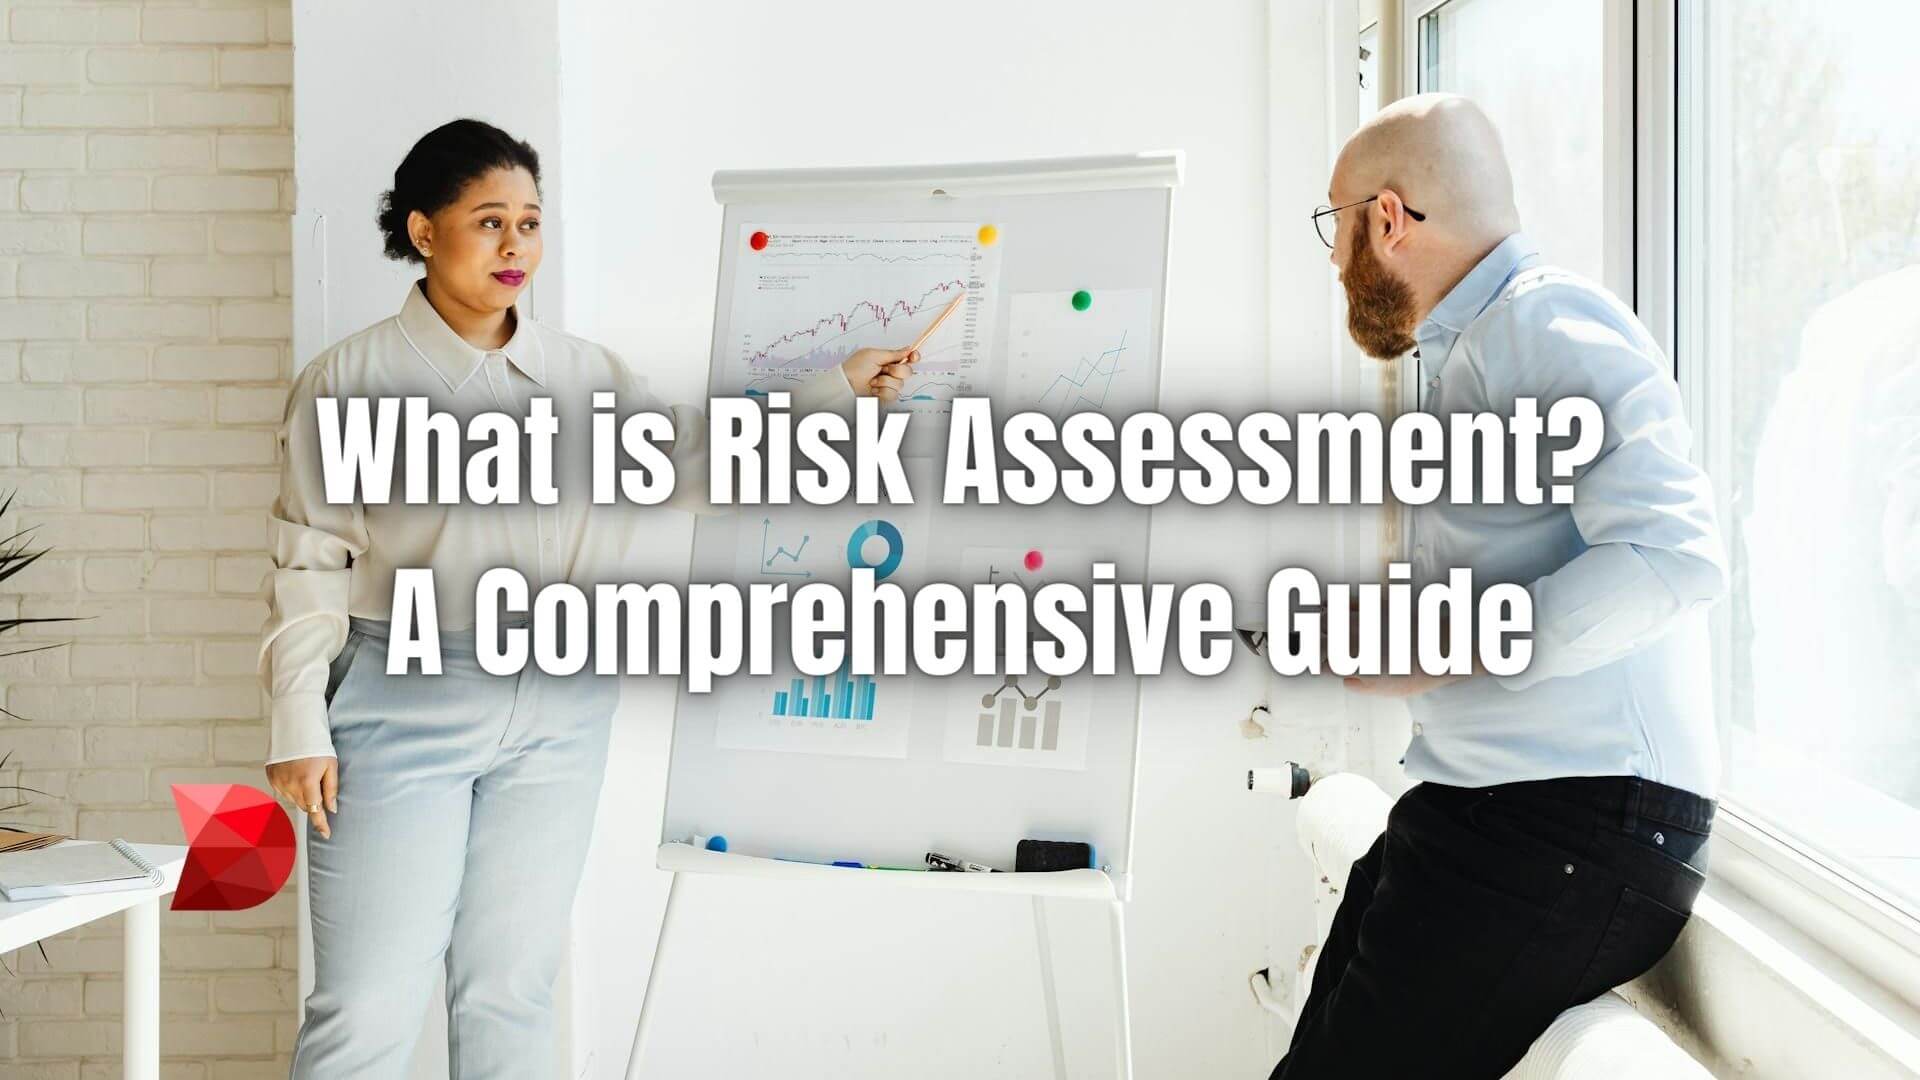 Unlock the essentials of risk assessment with our comprehensive guide. Learn how to identify, evaluate, and mitigate risks effectively.